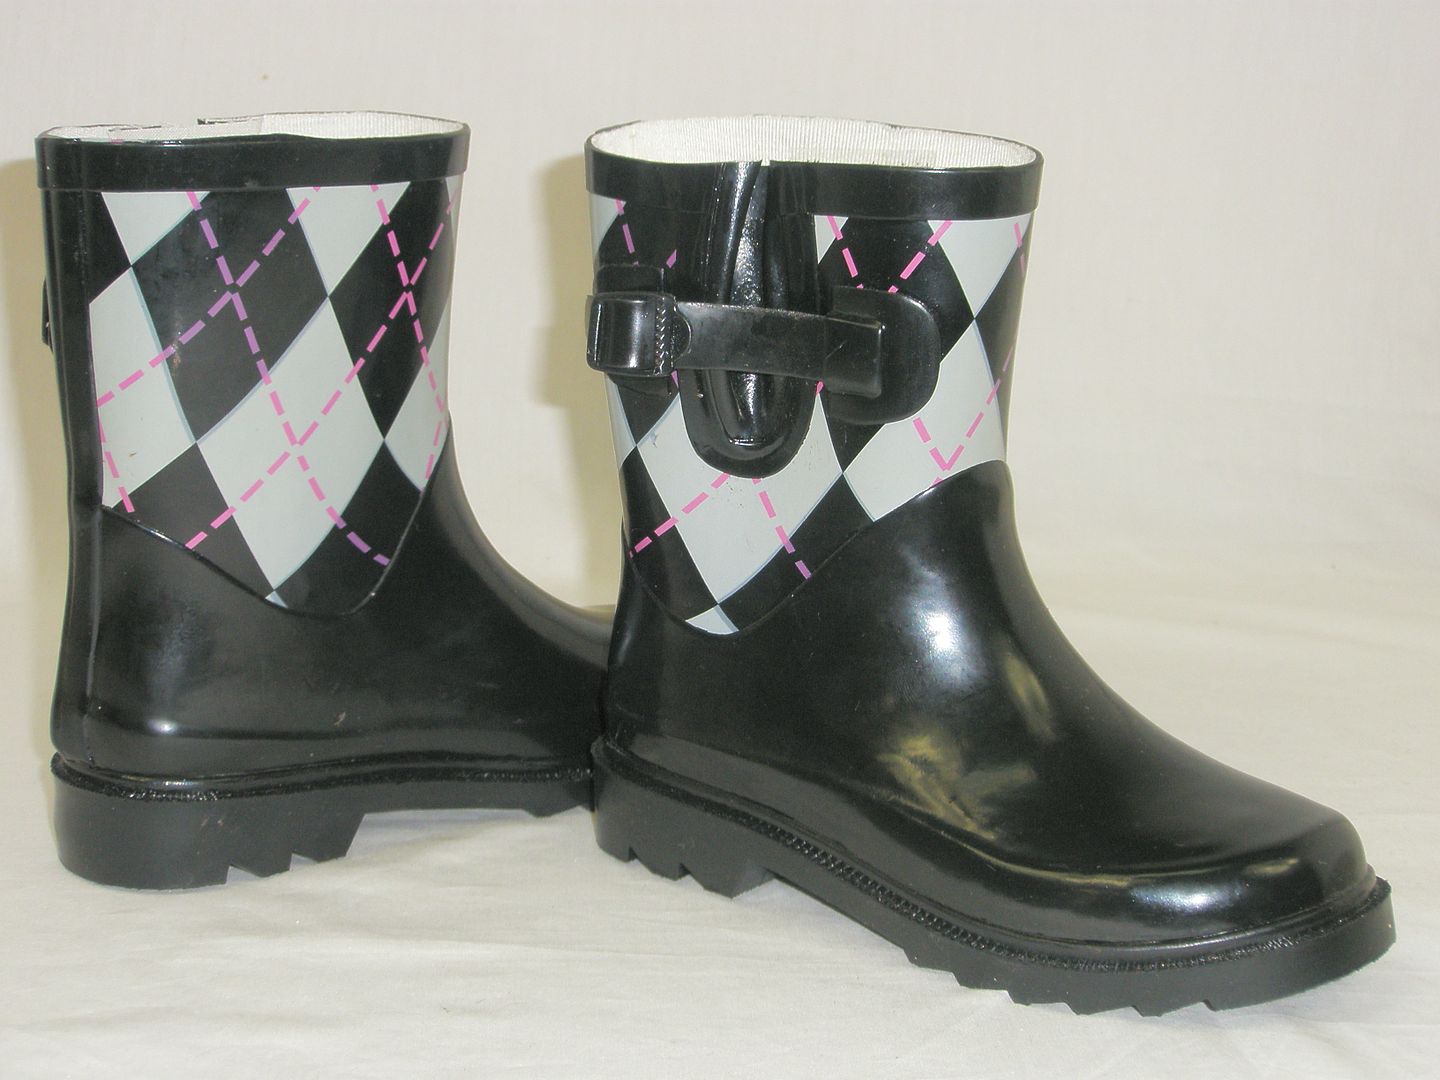 Girls Boys Kids Flat Galoshes Wellies Rubber Rain Boots Many Colors All Sizes